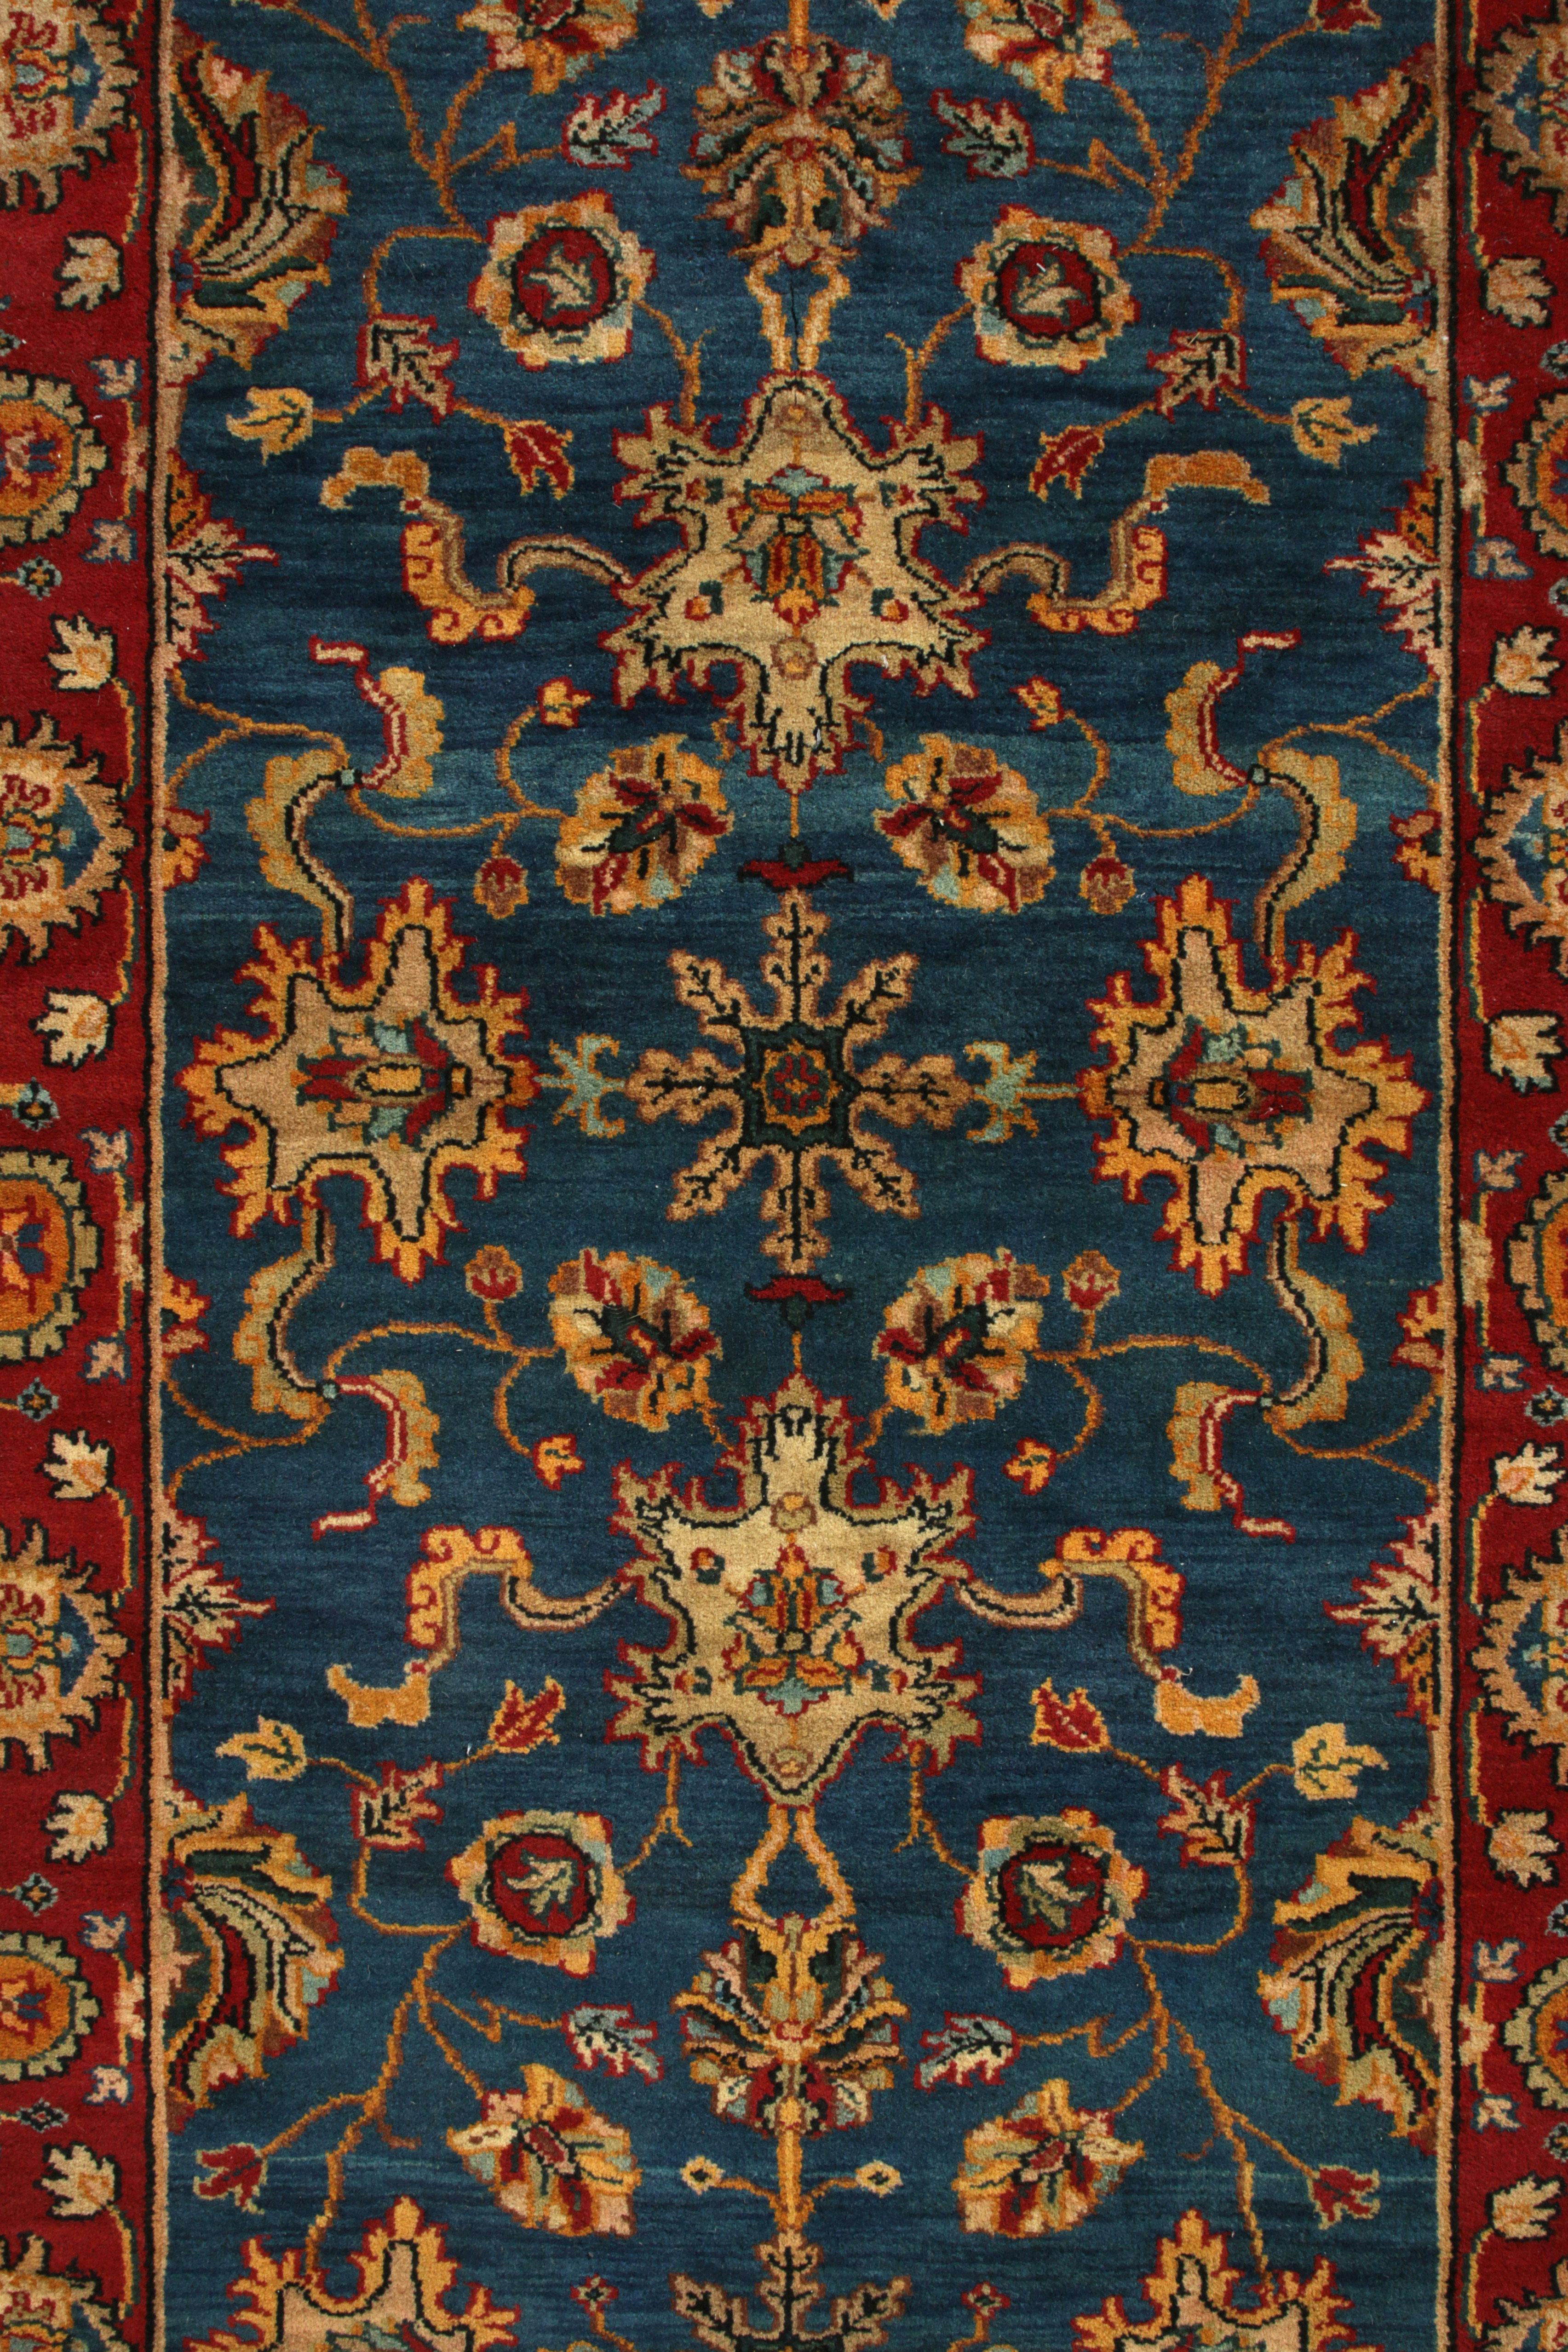 Hand-Knotted Rug & Kilim's Vintage Agra Style Runner in Transitional All-Over Floral Pattern